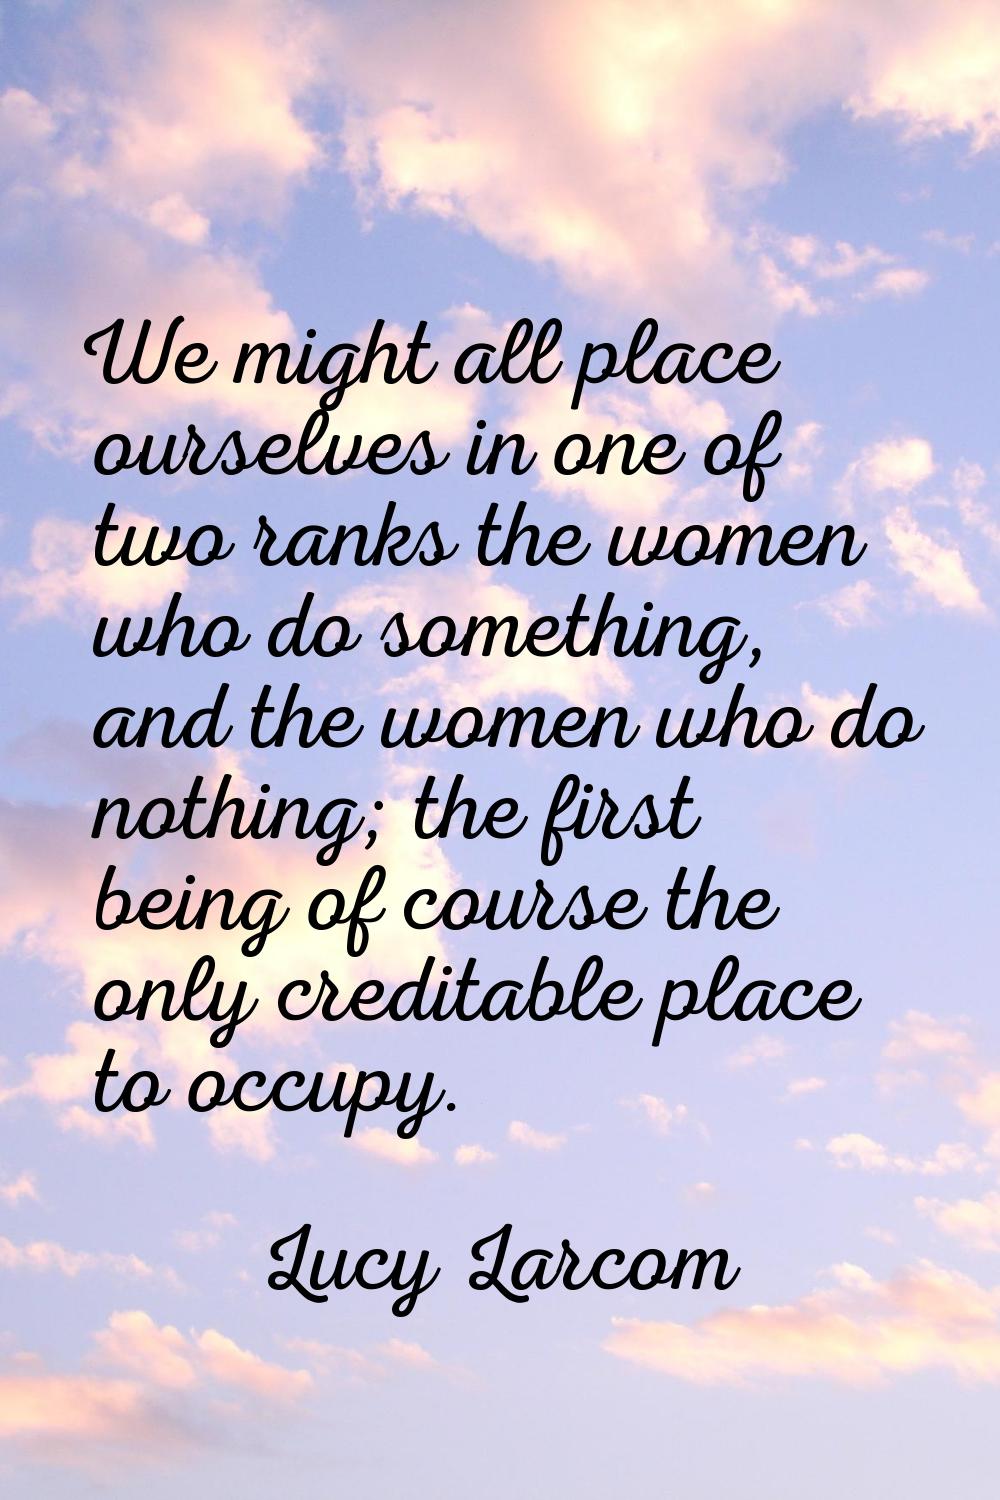 We might all place ourselves in one of two ranks the women who do something, and the women who do n